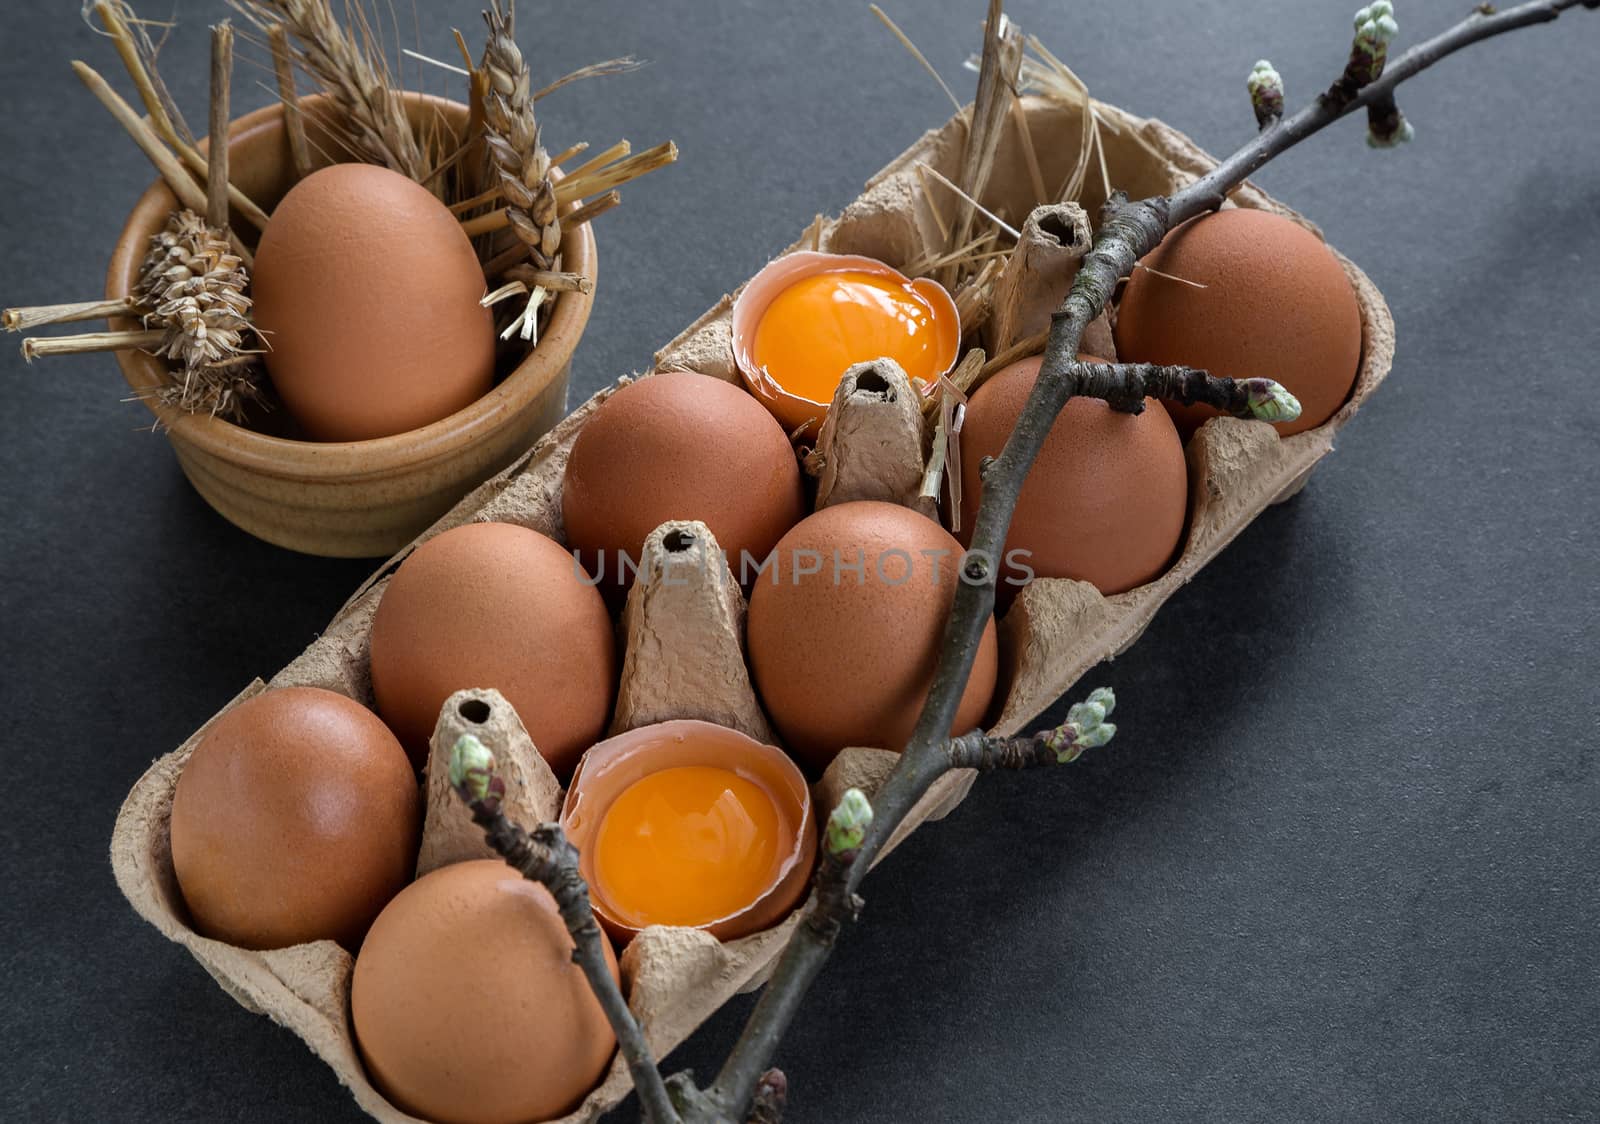 chicken eggs in a cardboard grid by ires007